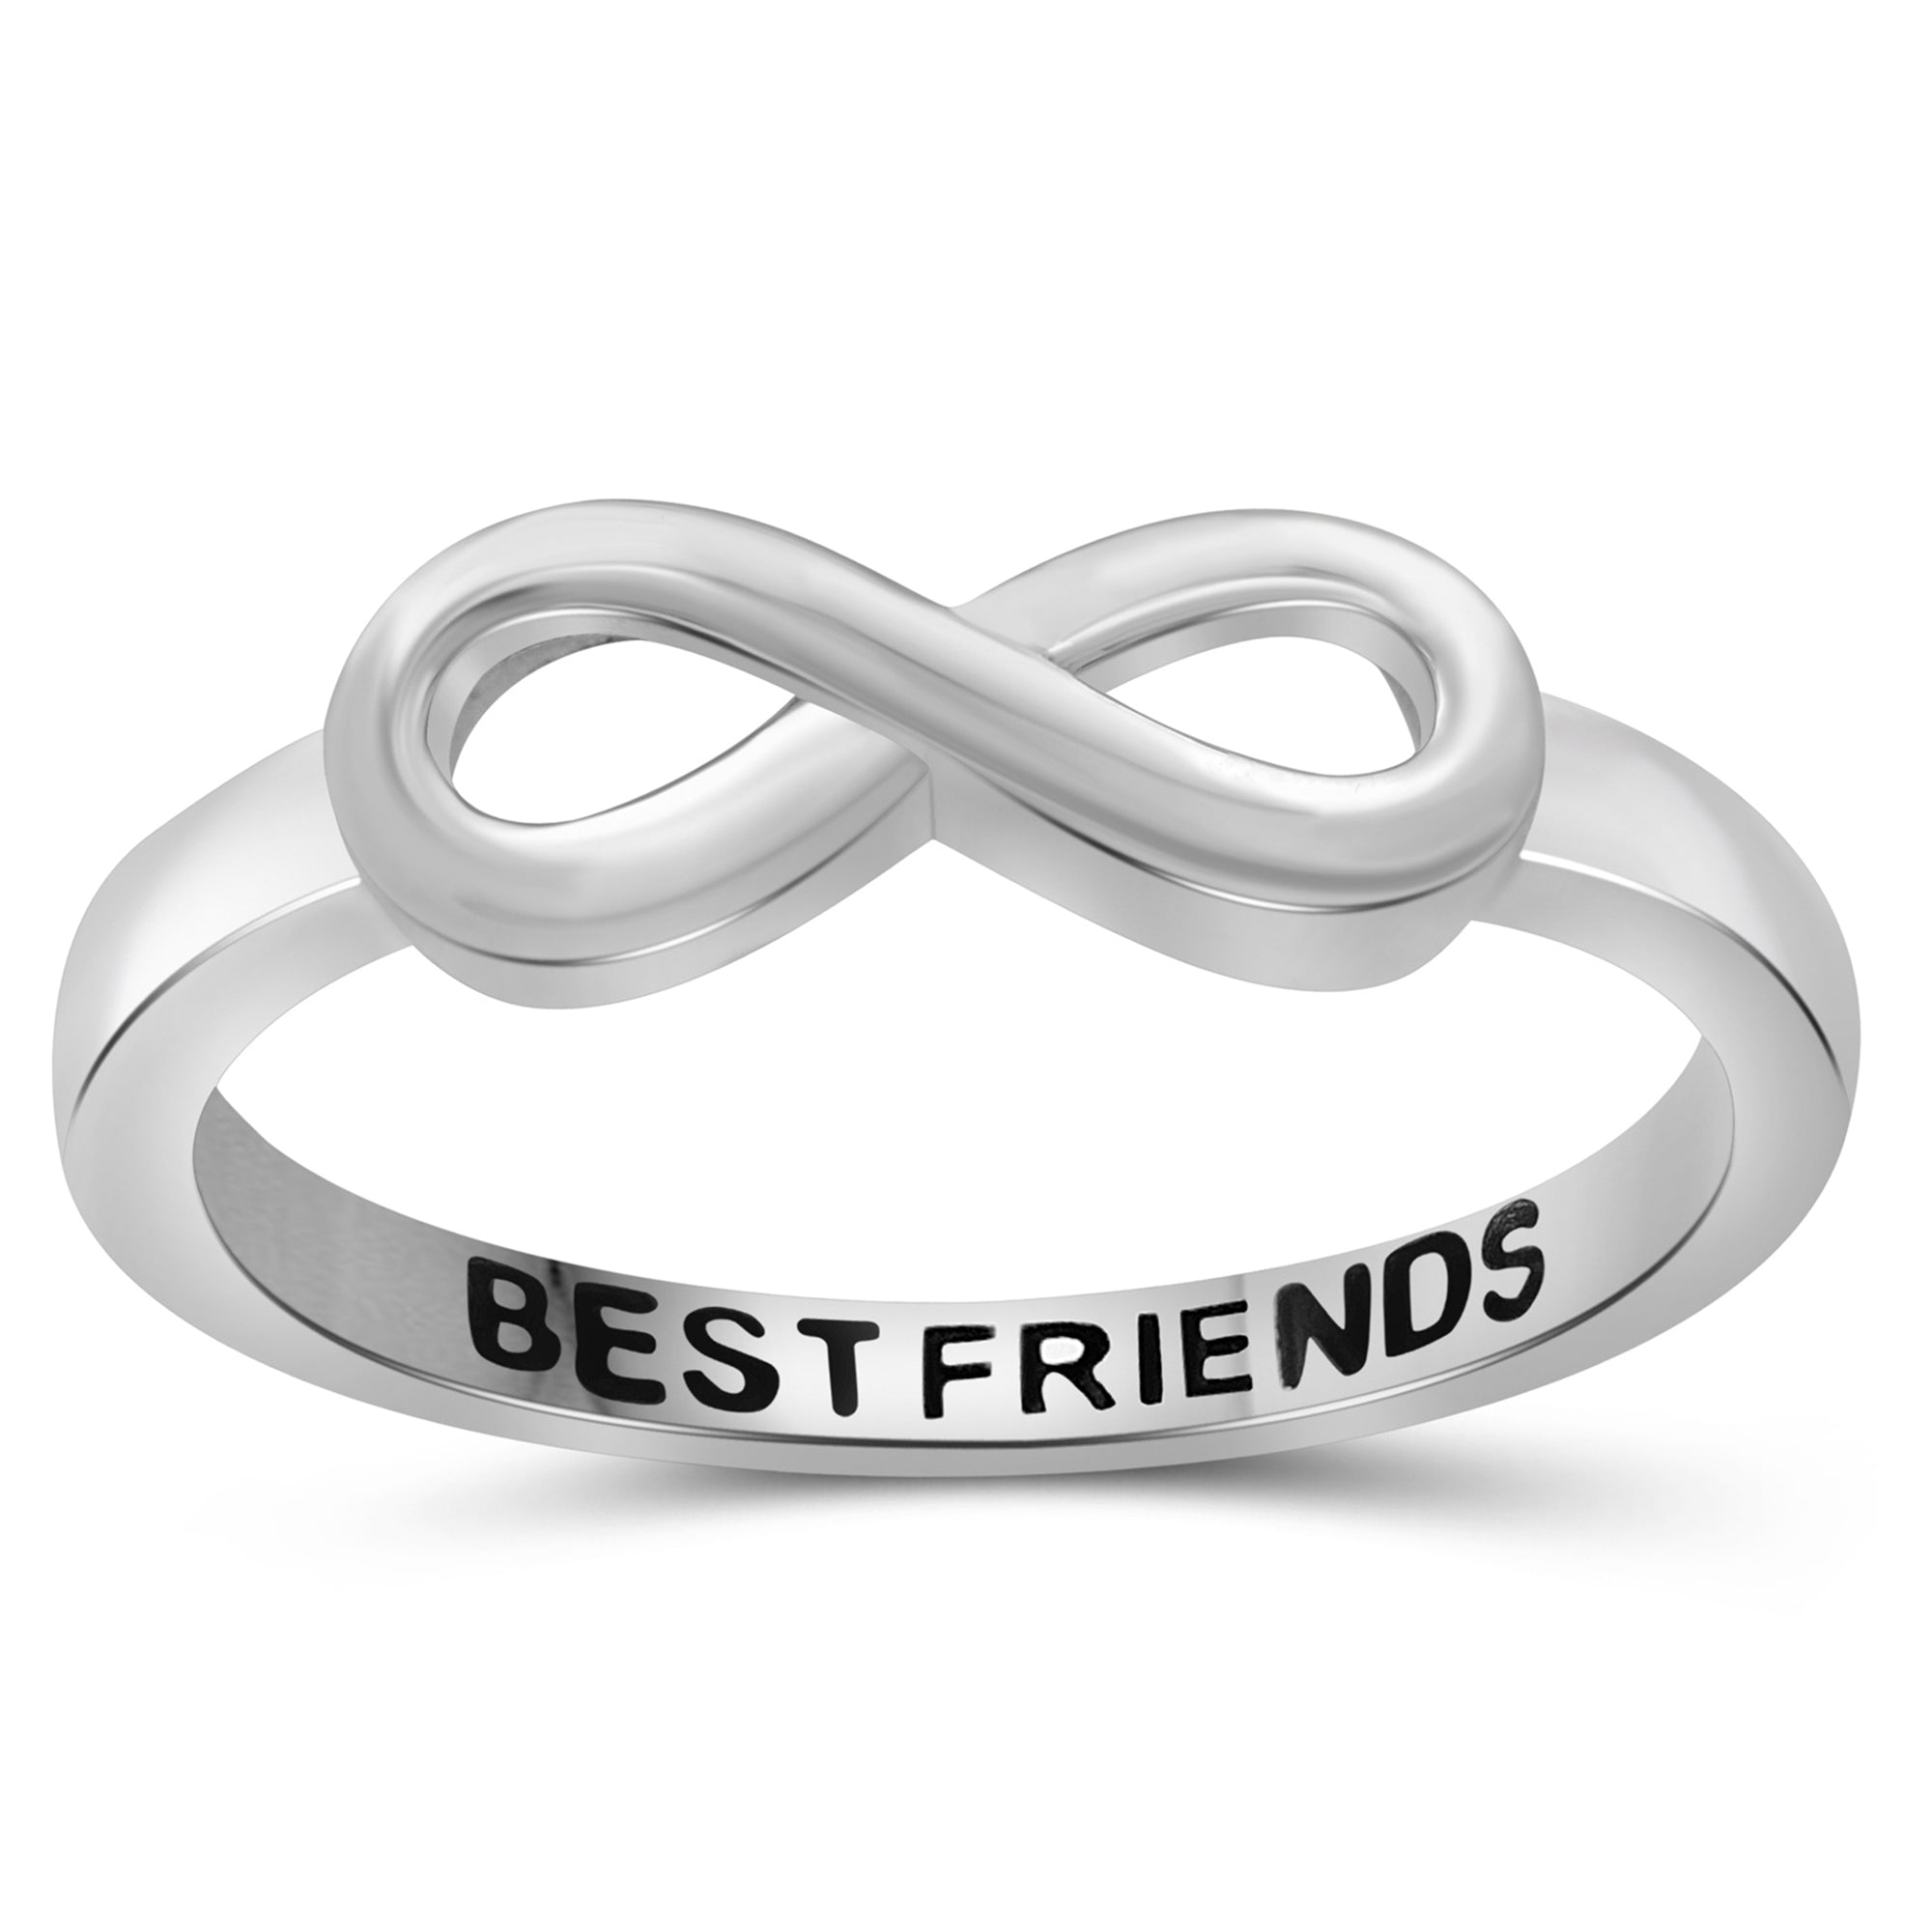 Buy Pyaar By Accessoo Silver Silver Couple Hug Ring For Girlfriend, Wife  and Best Friend at Amazon.in